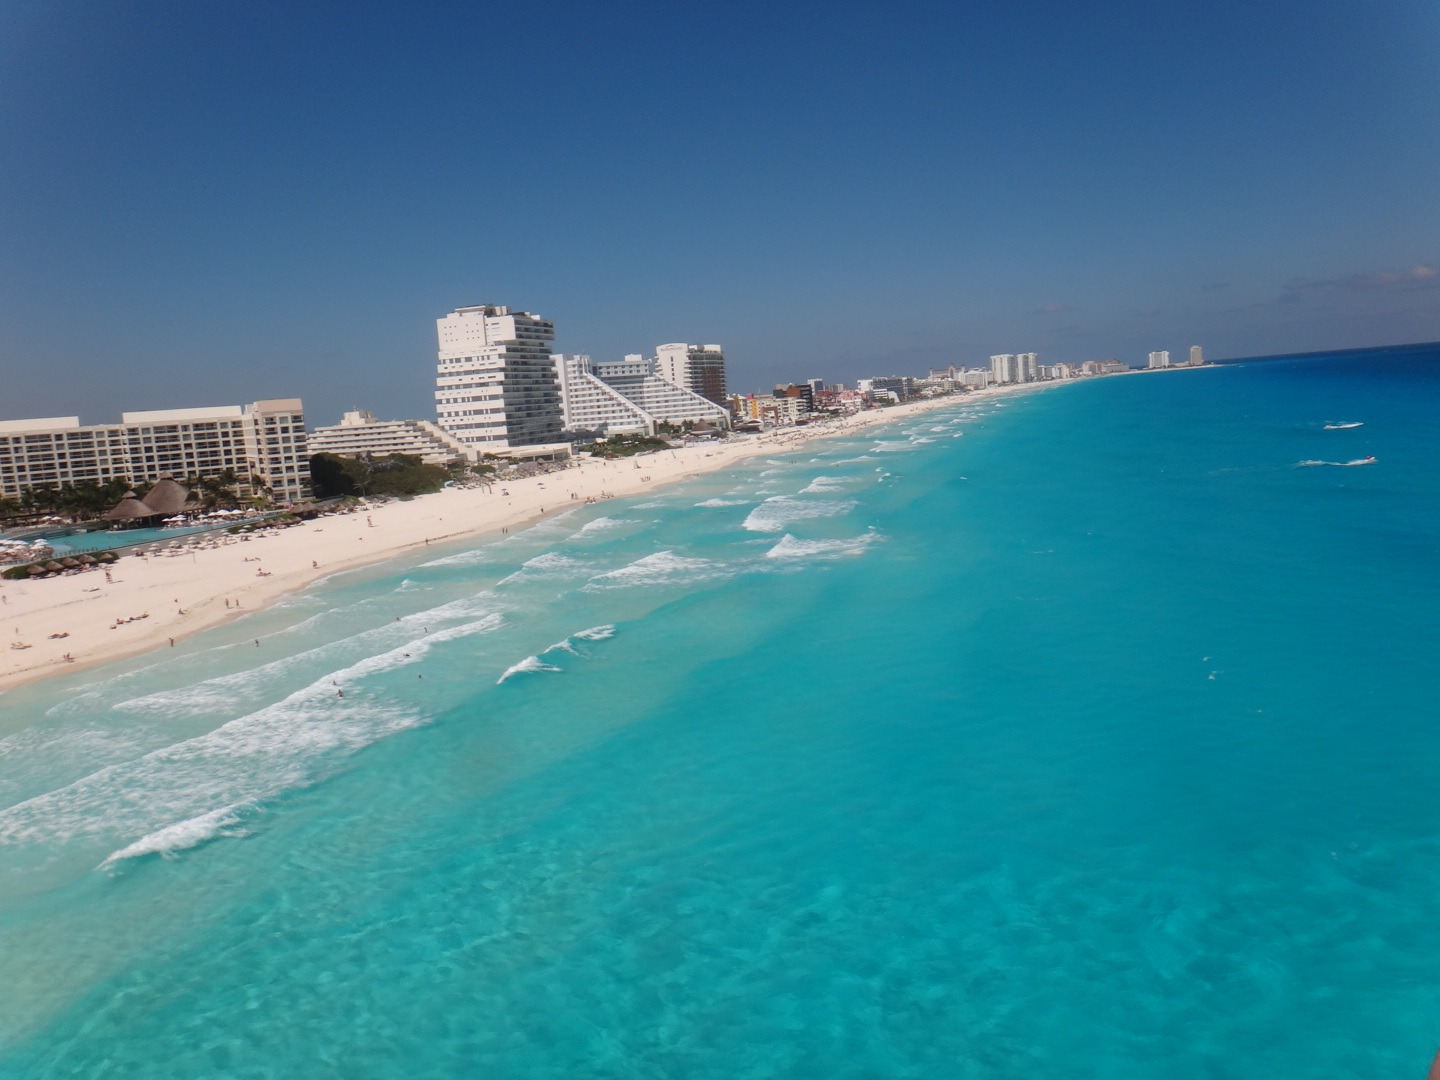 One of the best beaches in Mexico: Cancun has crystal clear water and soft white sand